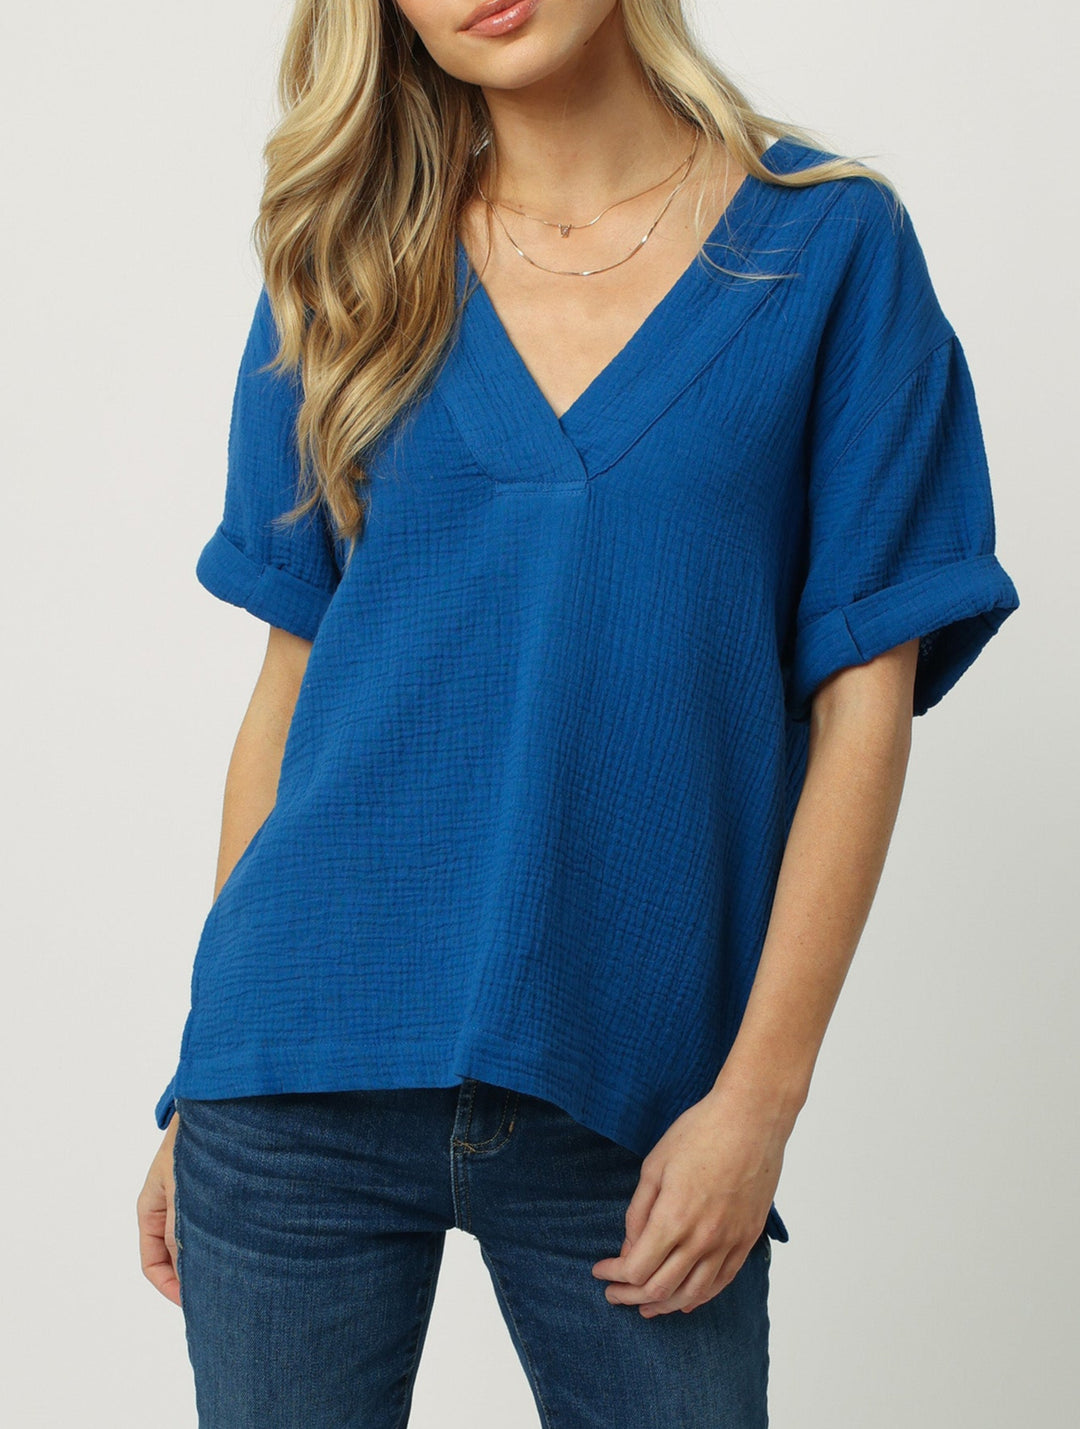 image of a female model wearing a JAILEE SHORT SLEEVE V NECK TOP LAPIS BLUE TOPS